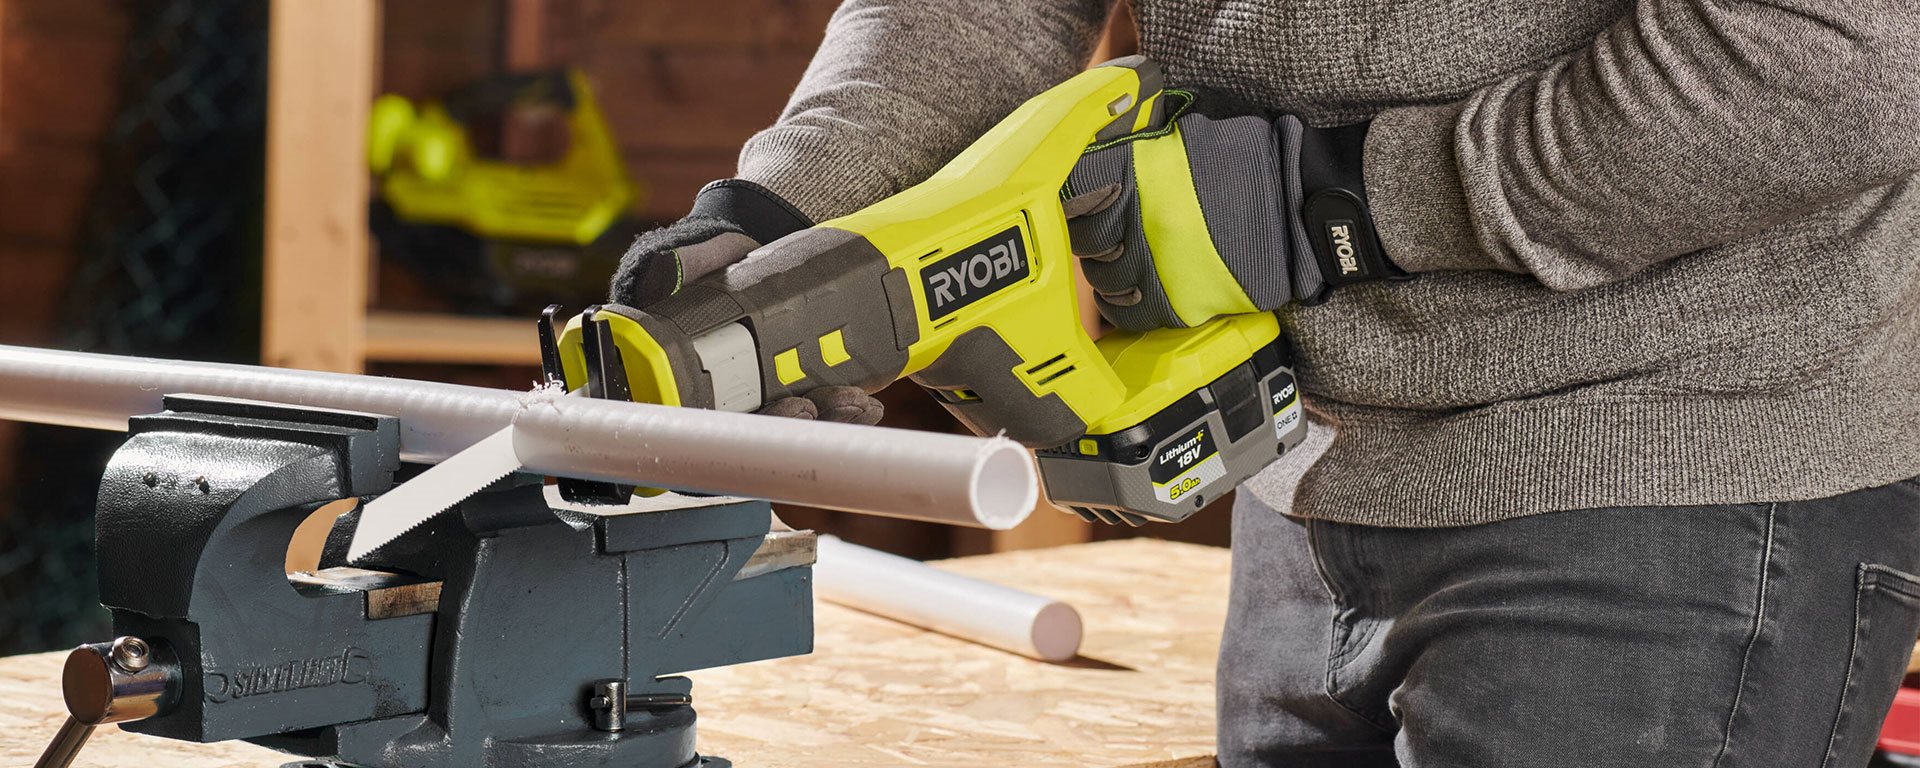 What is the difference between a jigsaw and a reciprocating saw?